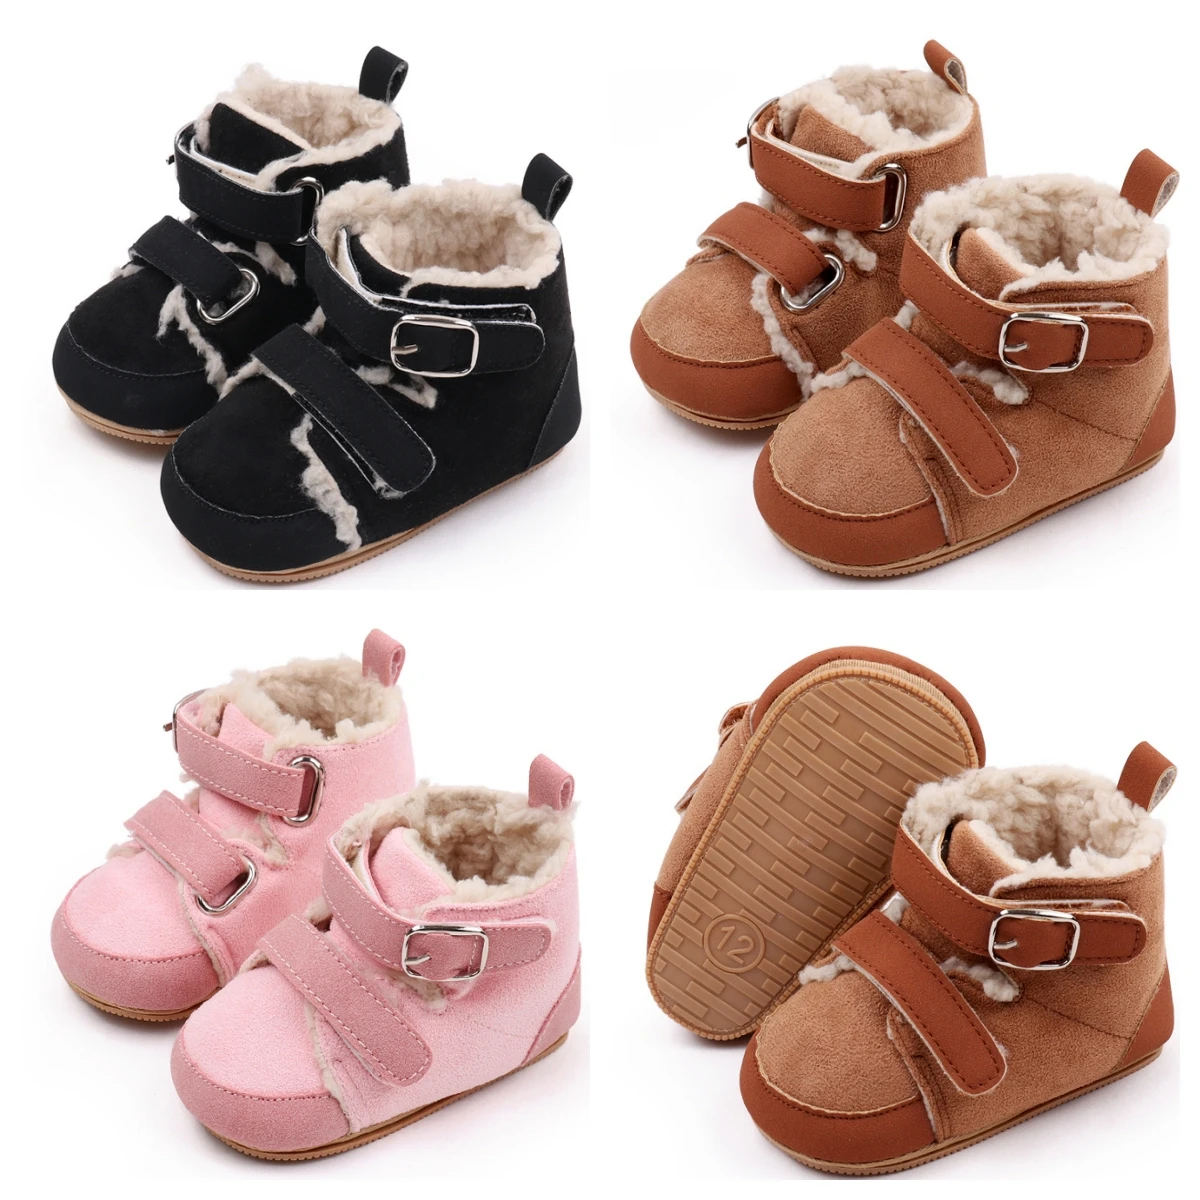 

Toddler Newborn Baby Unisex Shoes Girls Boys Winter Warm Boots Plush Pom Snow Shoes Rubber Sole Walking Shoes for Infant 0-18M